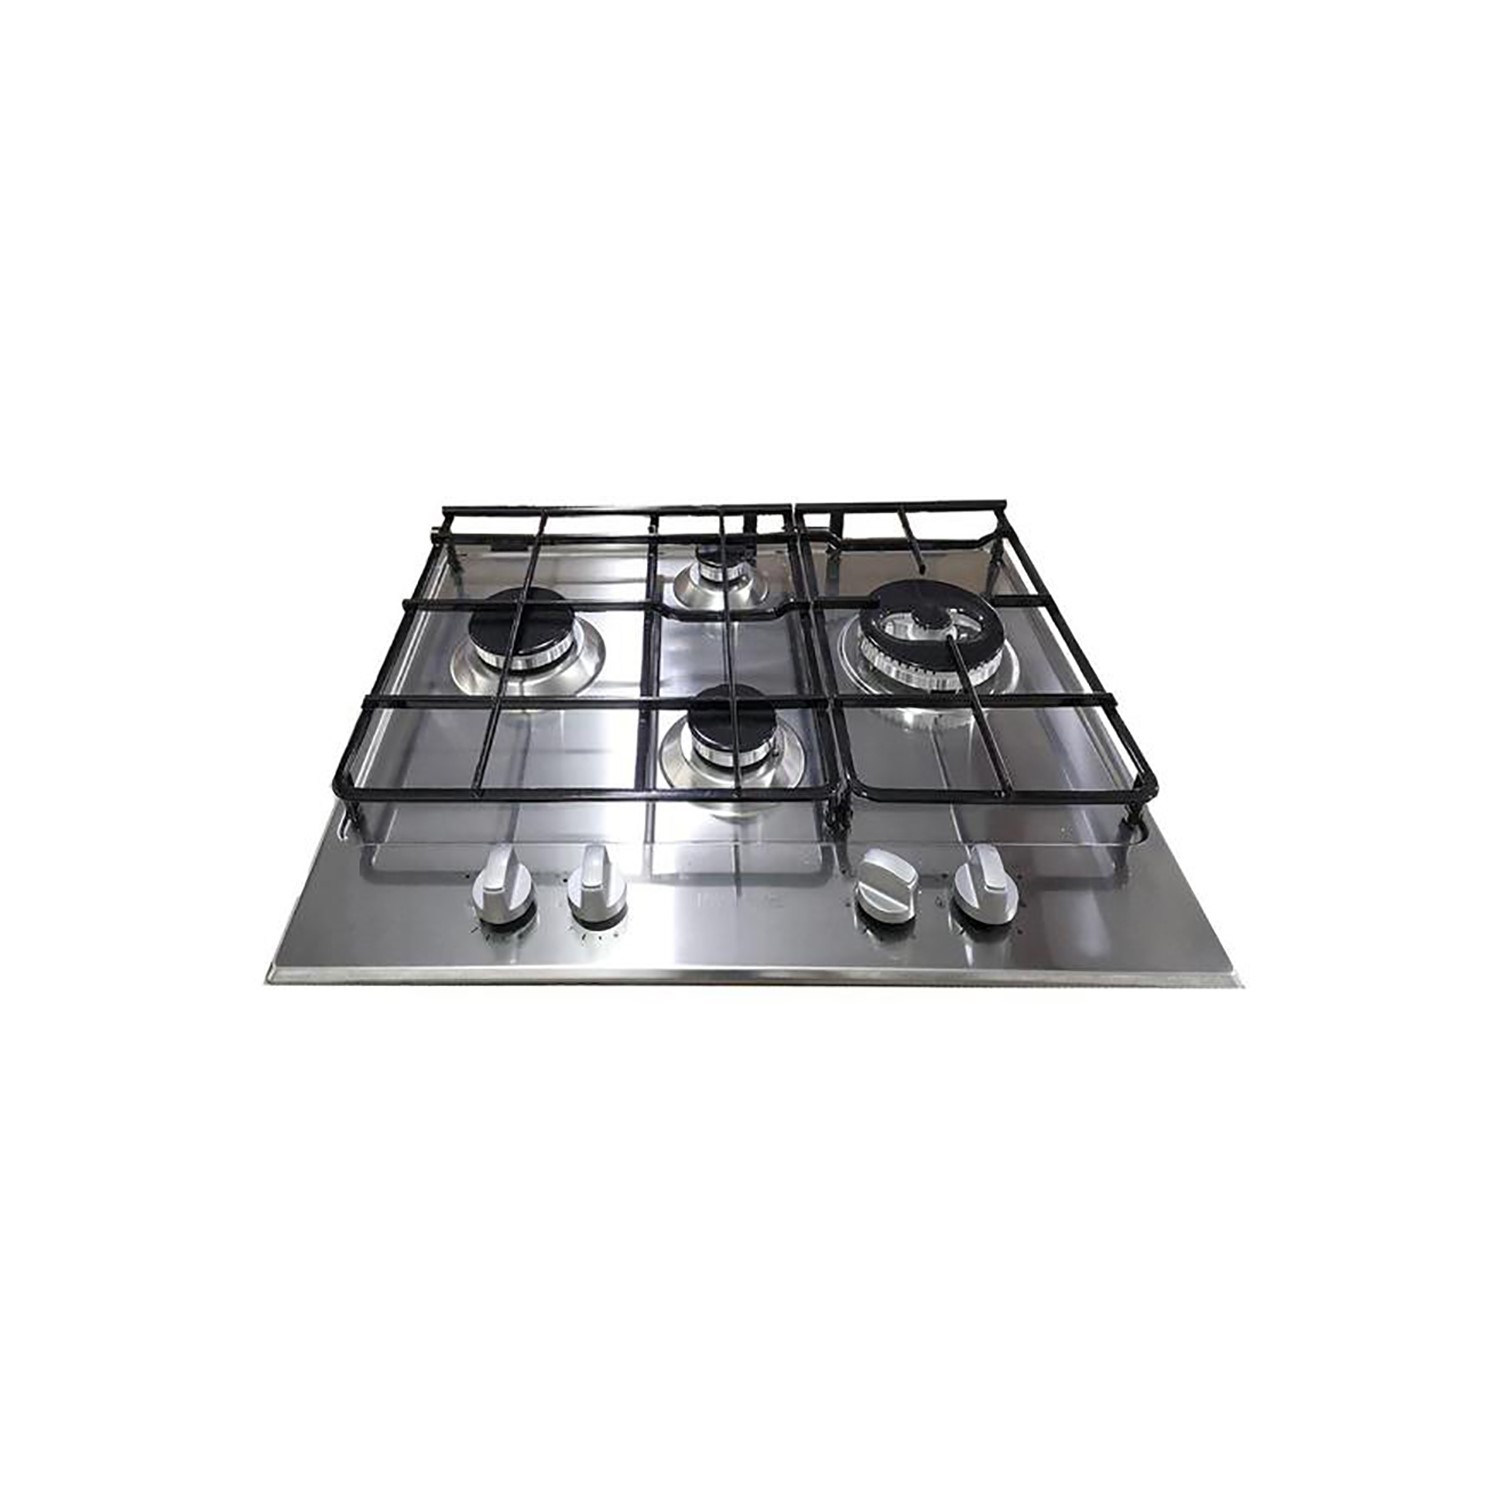 Refurbished Hotpoint GB6401RX 65cm Gas Hob Stainless Steel